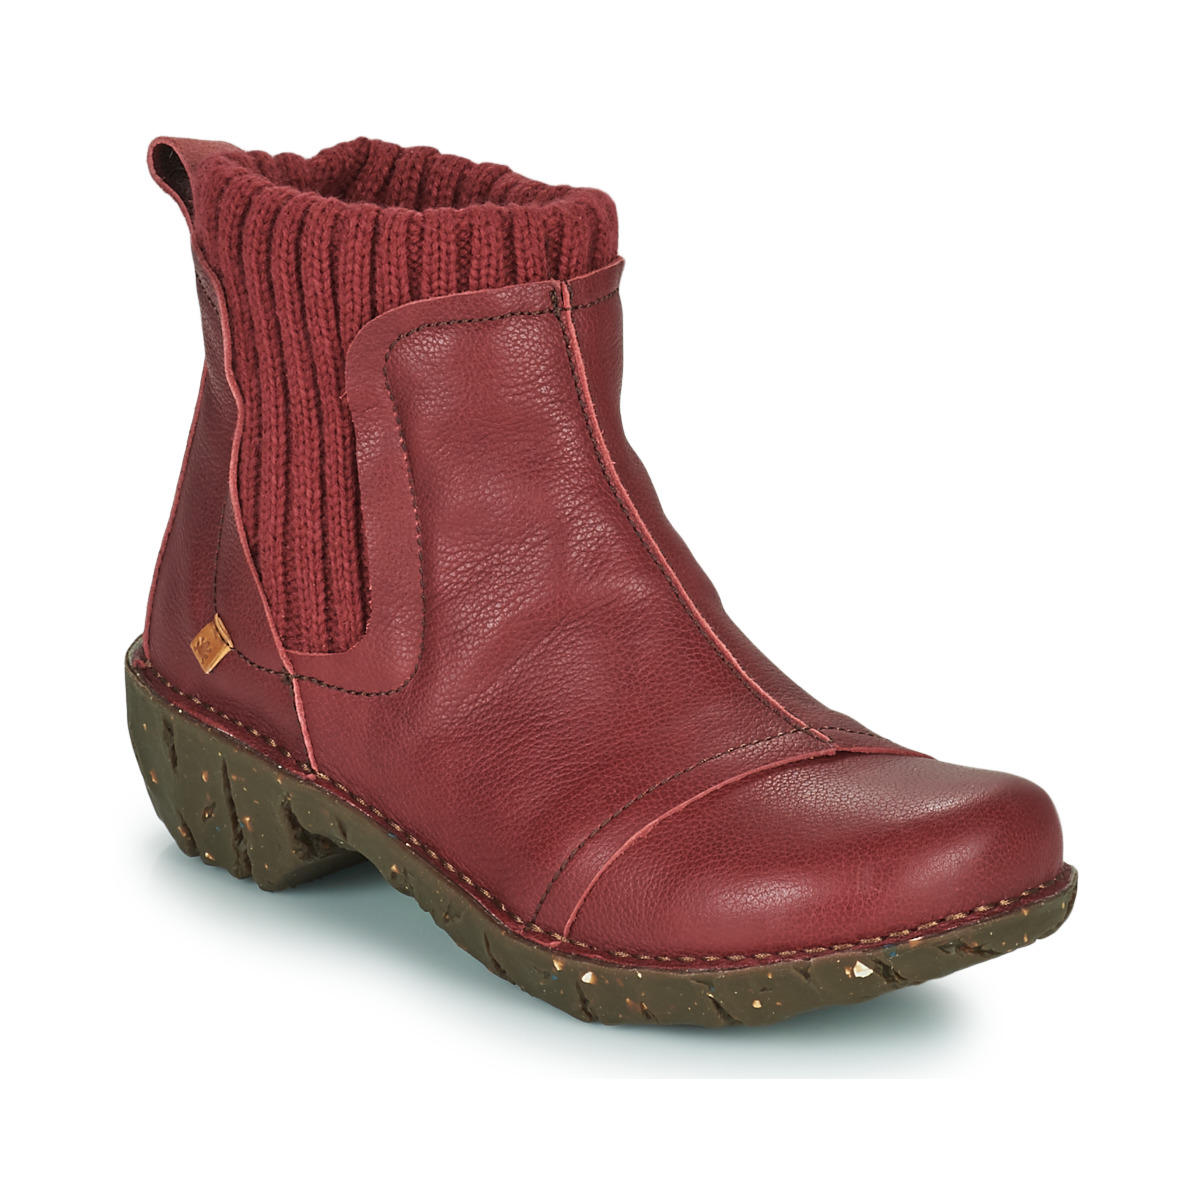 Chaussures Femme elasticated-side Boots El Naturalista YGGDRASIL Bordeaux